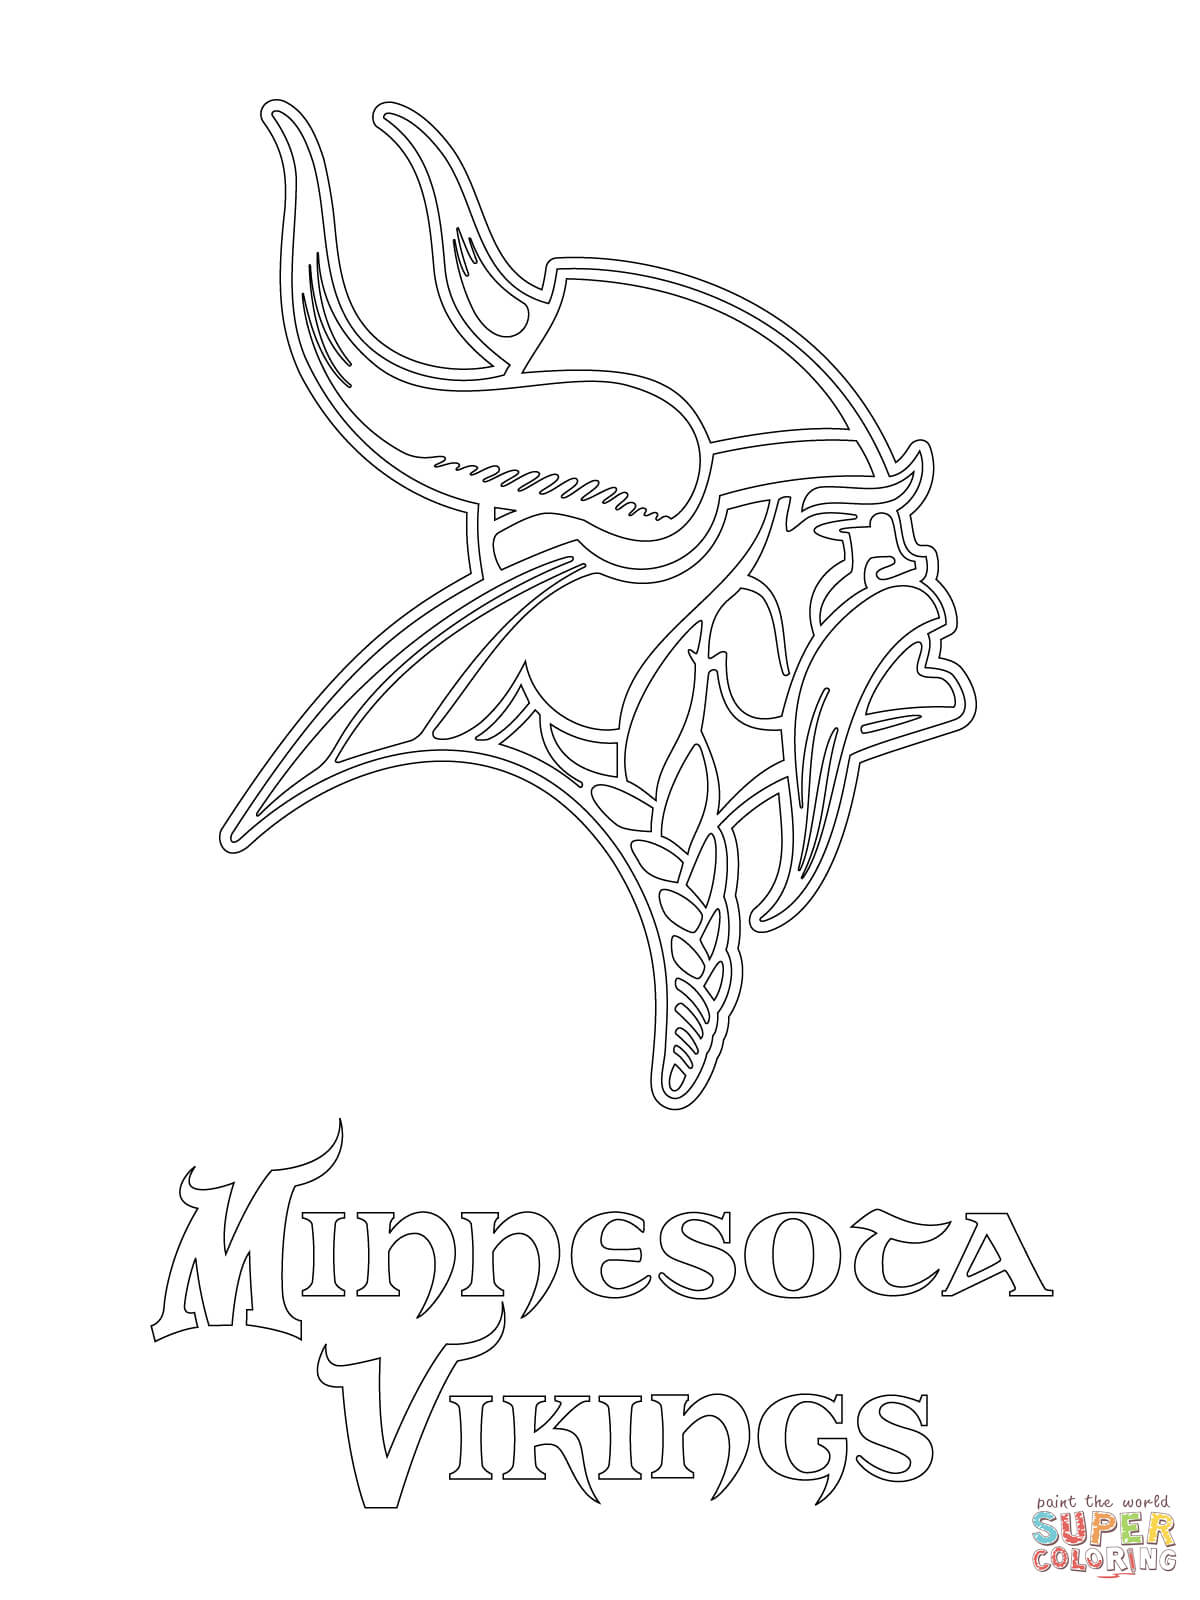 Minnesota vikings logo coloring page free printable coloring pages